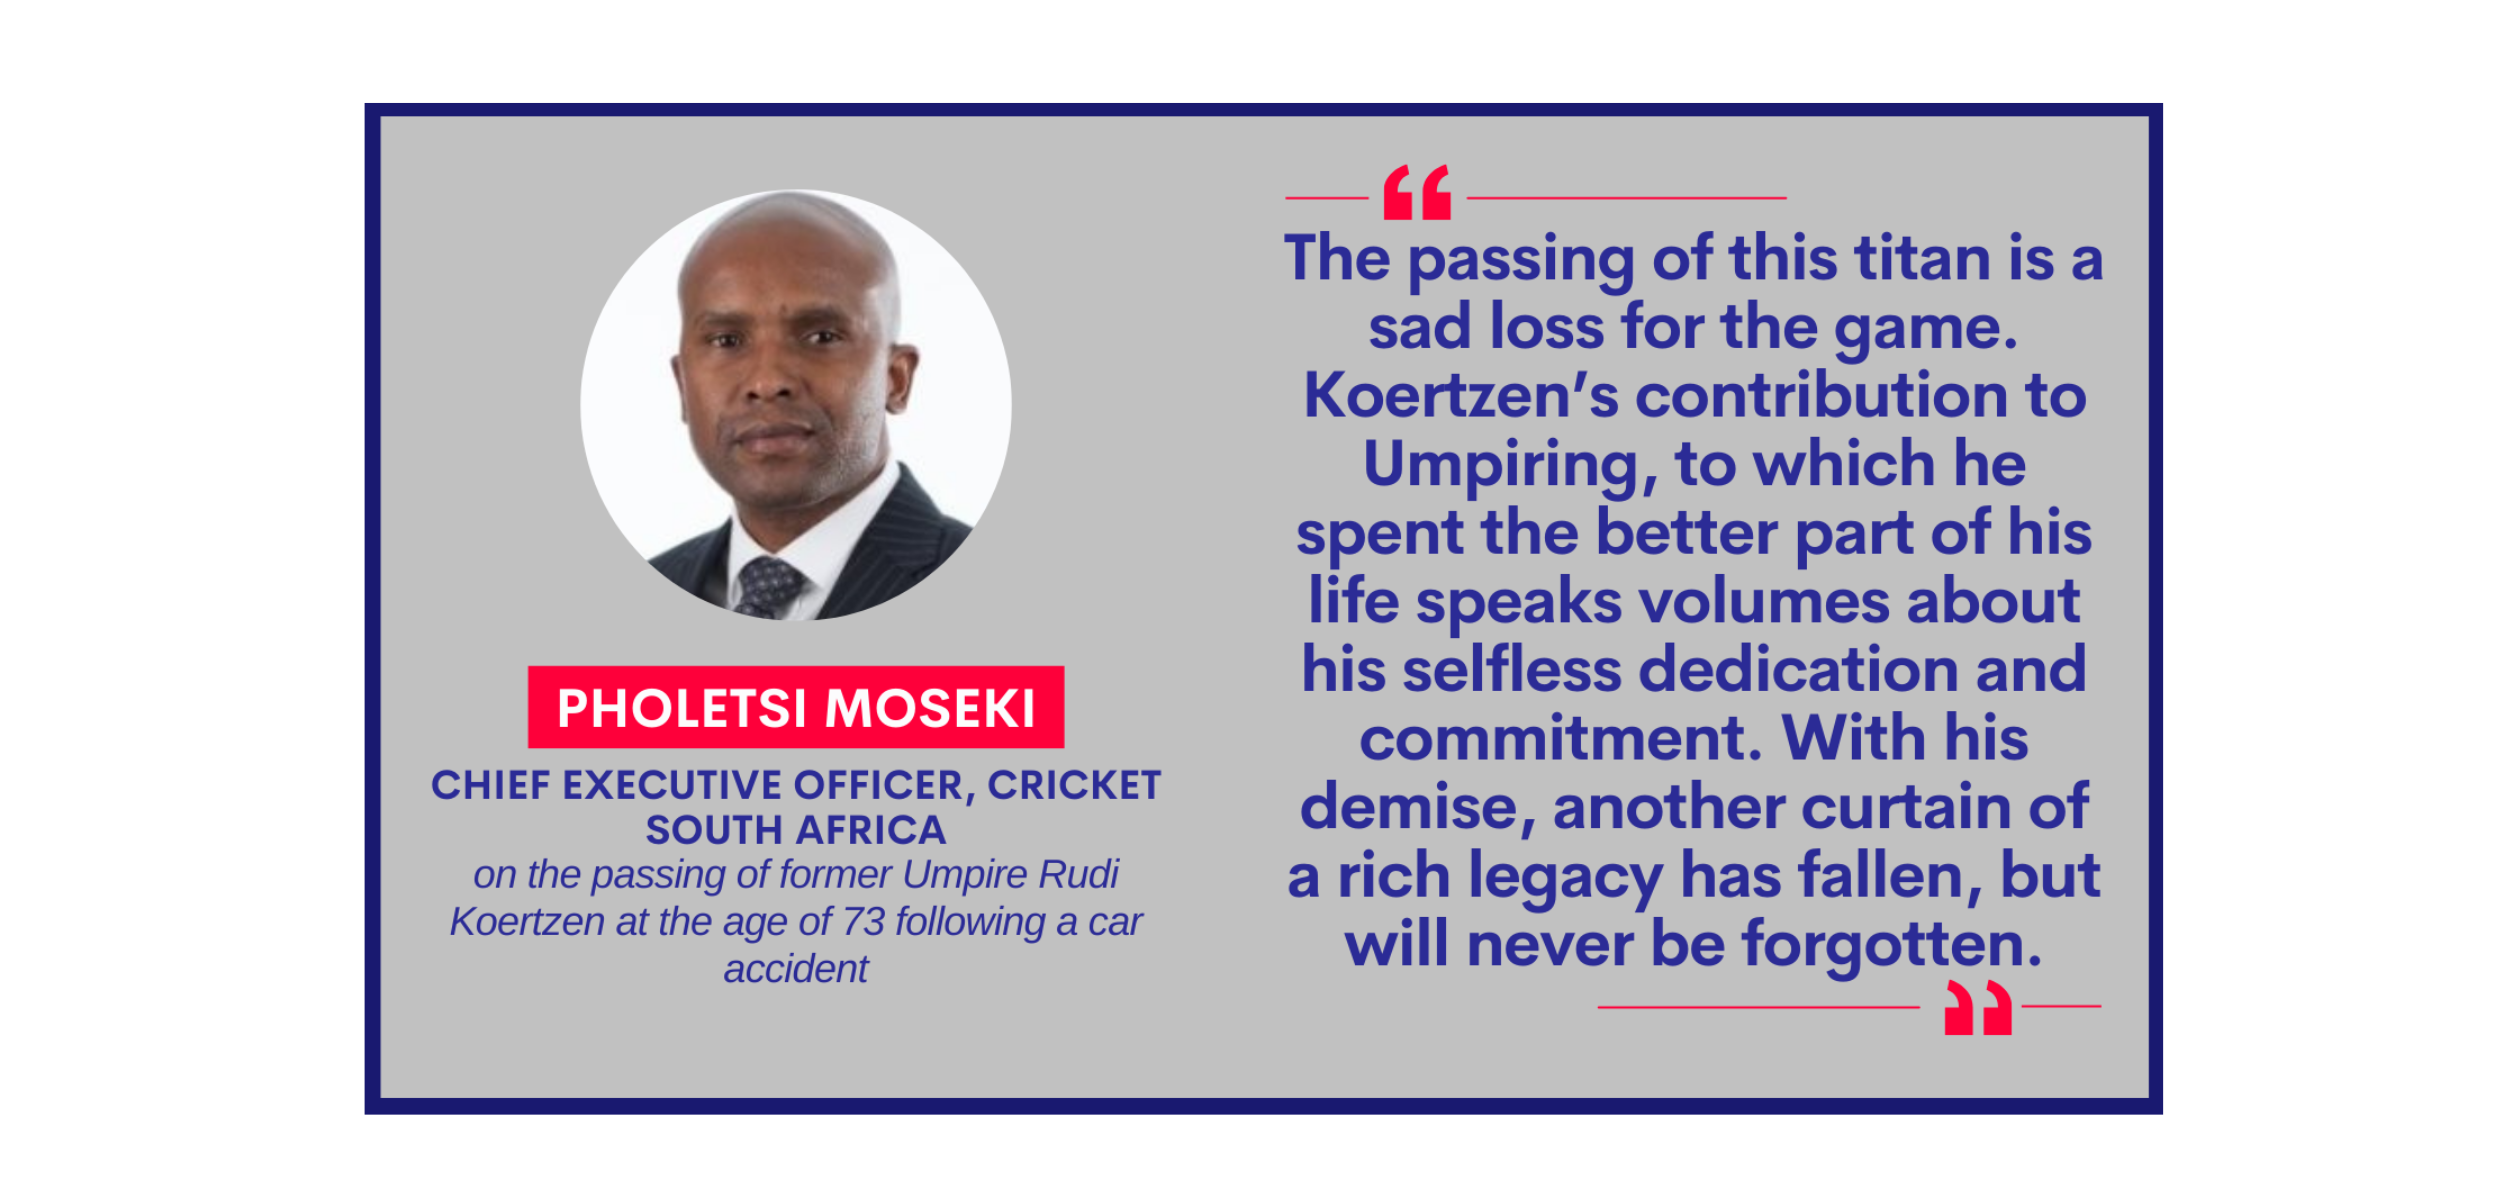 Pholetsi Moseki, Chief Executive Officer, Cricket South Africa on the passing of former Umpire Rudi Koertzen at the age of 73 following a car accident